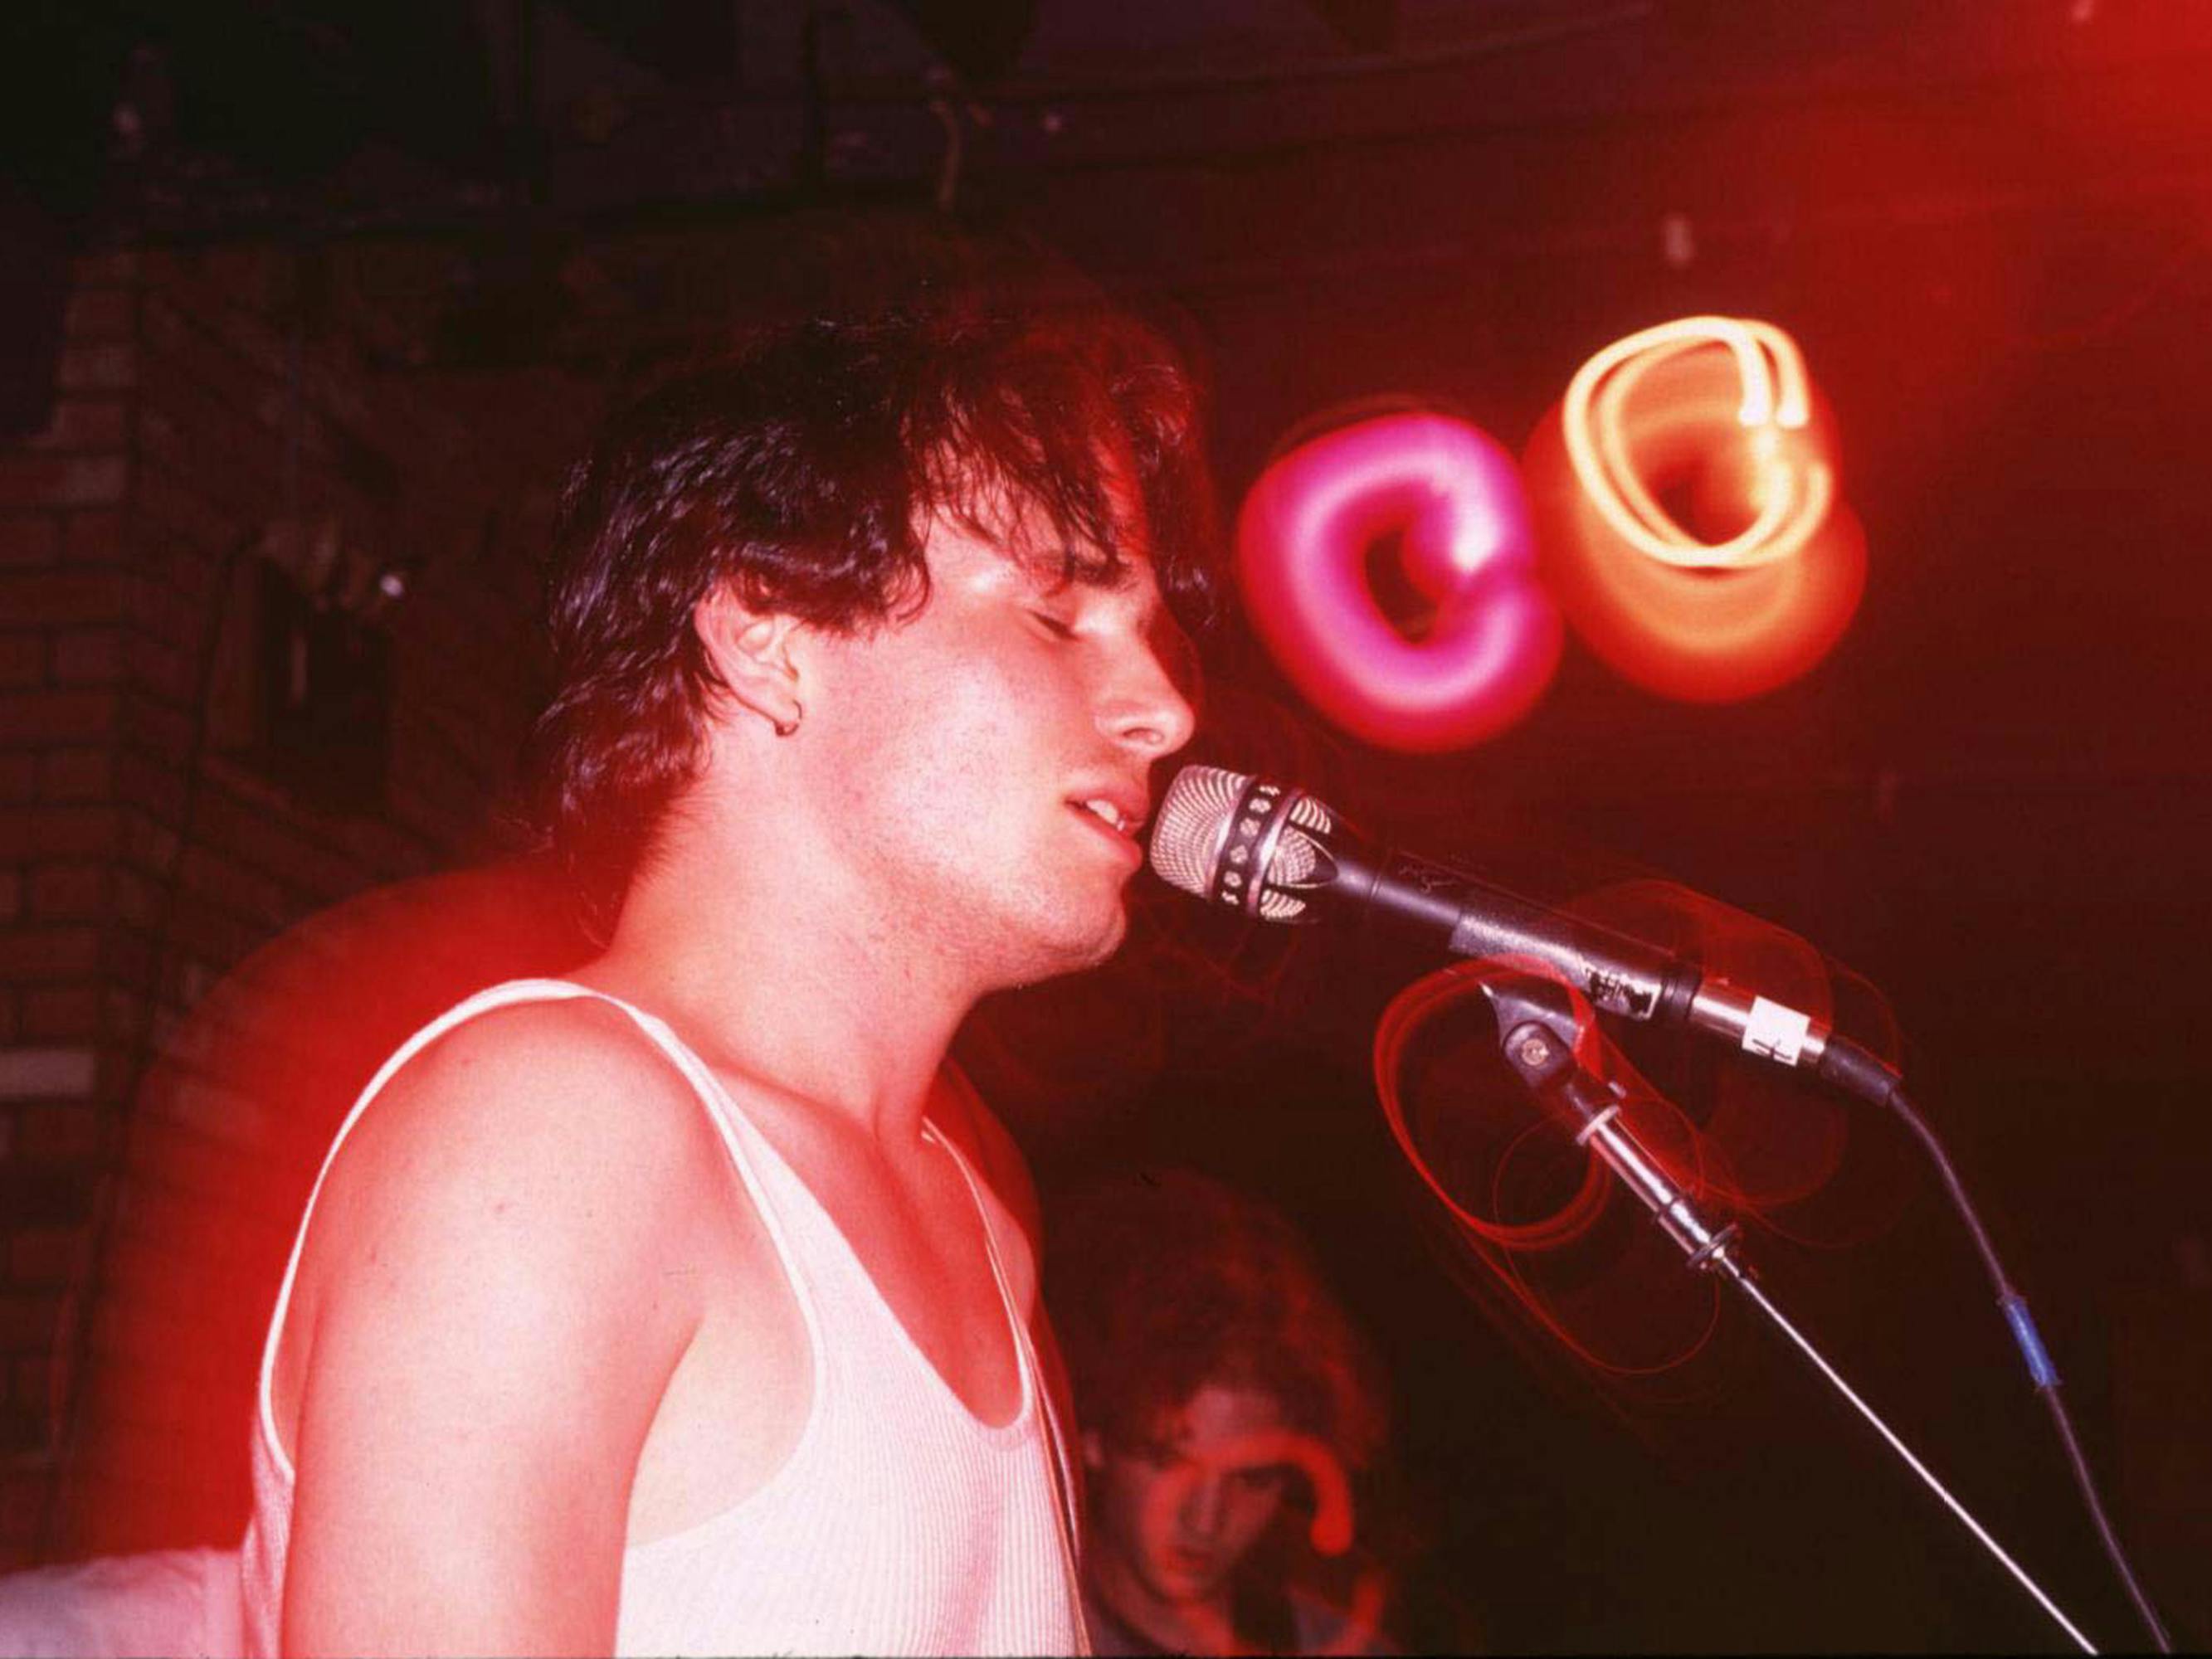 Jeff Buckley sings into a microphone earnestly, lit by red and yellow lights.